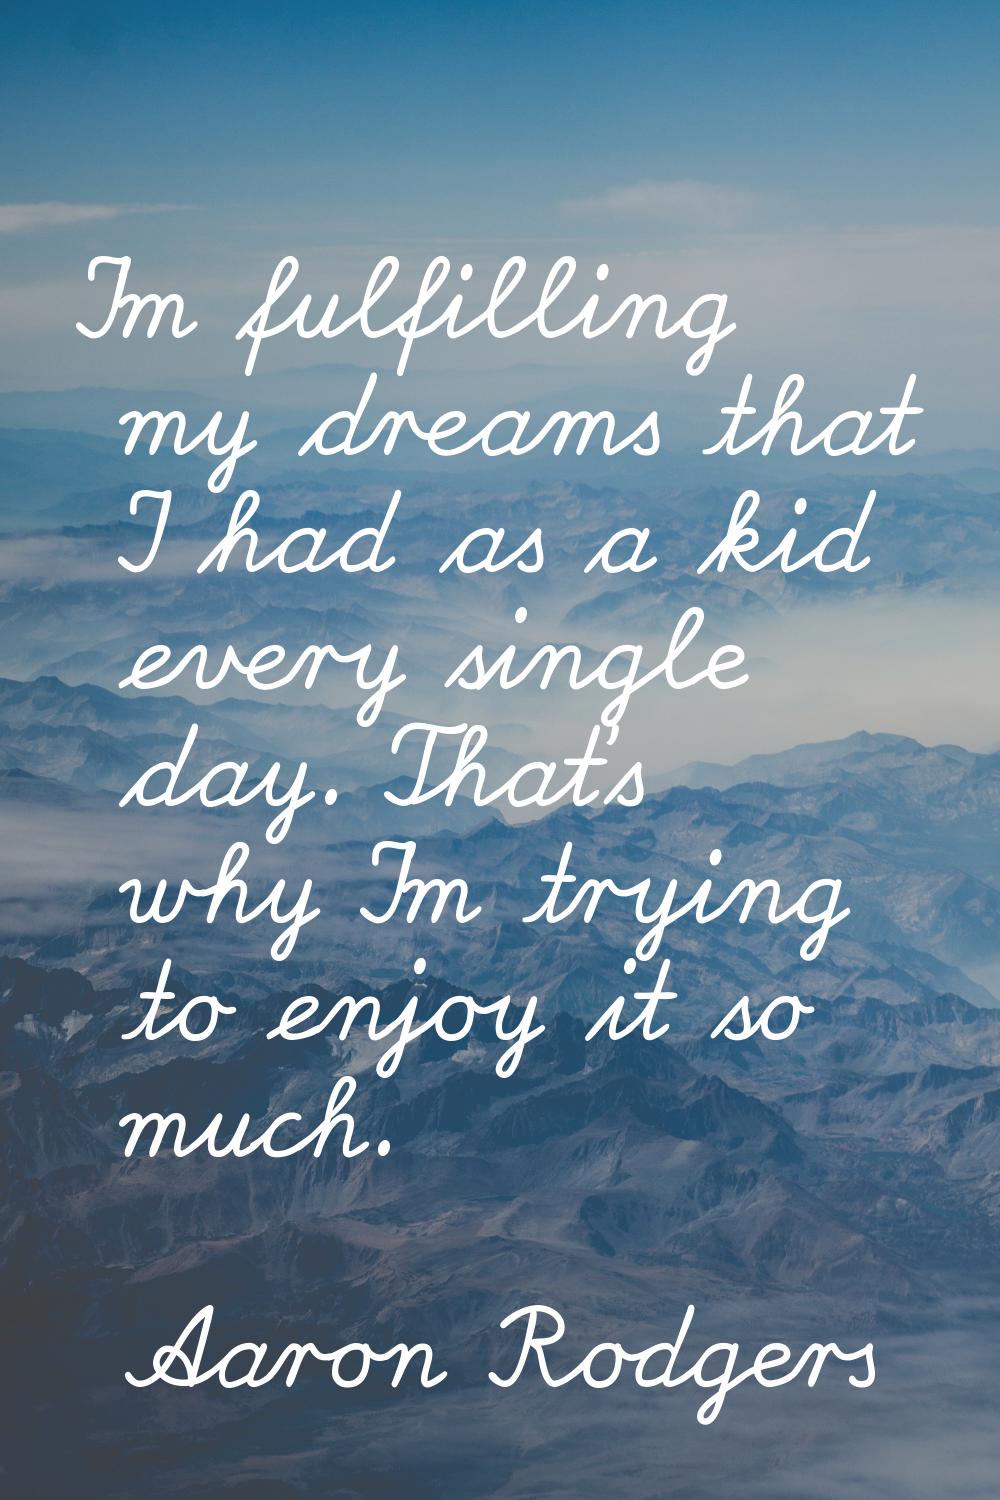 I'm fulfilling my dreams that I had as a kid every single day. That's why I'm trying to enjoy it so